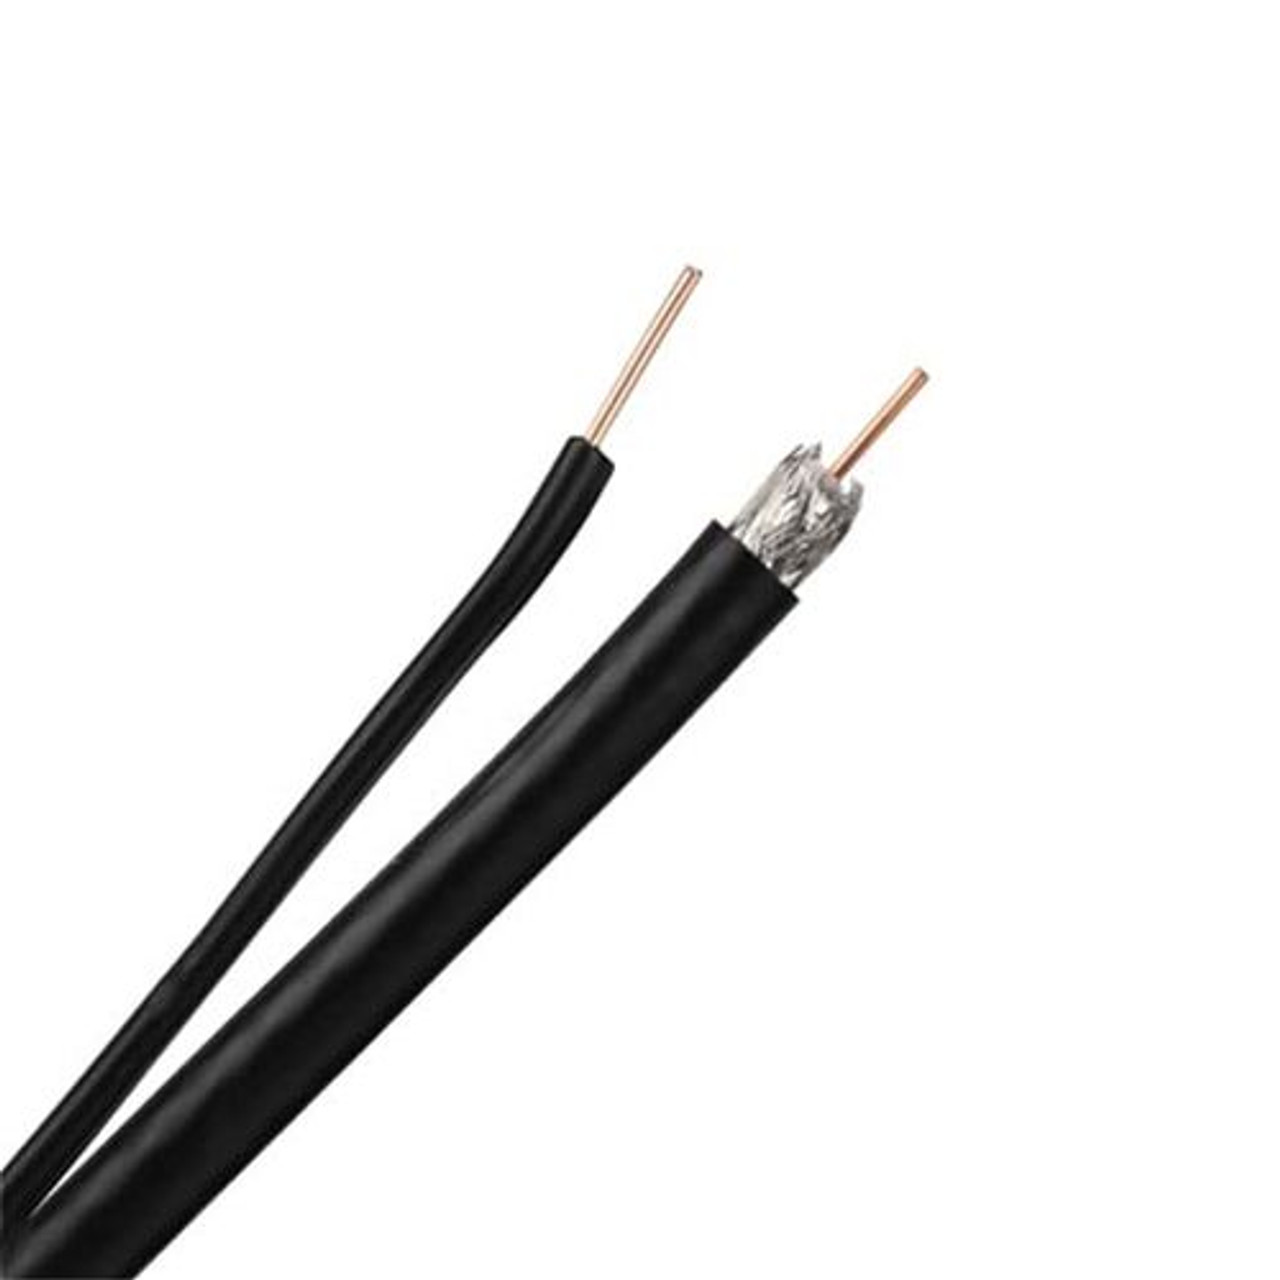 DIRECTV RG6 Coaxial Cable Messenger Ground 250' FT RG-6 Outdoor Drop CCS 3 GHz TV Antenna Aerial Digital Satellite Dish Video Signal